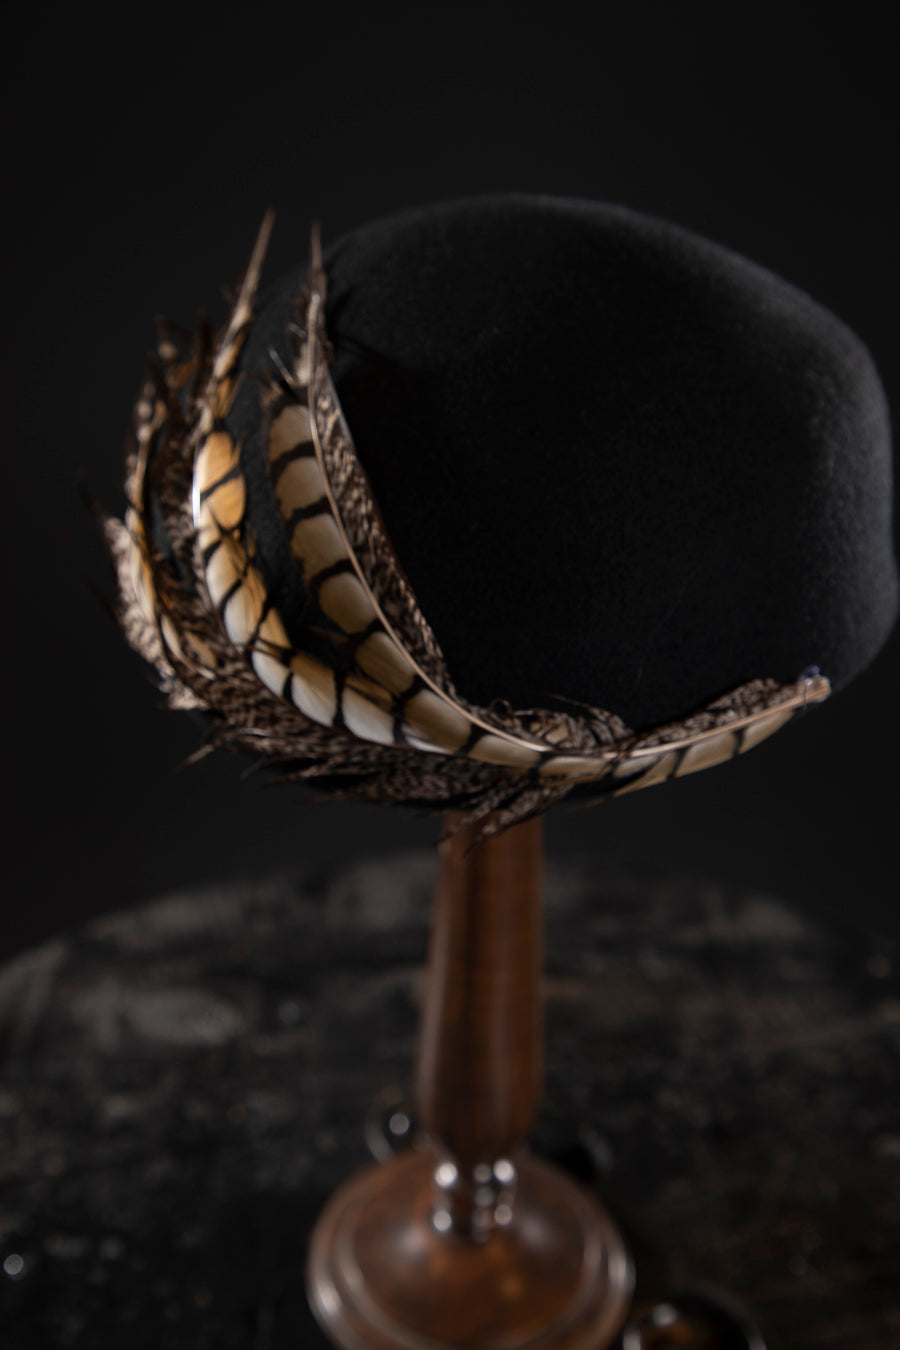 Structured Wool 1920s Beret with Feather -Deluxe, high-quality hats for men and women. Our collection of hats including wool felt top hats, fedoras, bowlers, caps, fedoras, trilbys, cloches and more are a wonderful addition to a 1920s Gangster or Gatsby costume, or the perfect fashion accessory. Shop online, or visit our Mornington hat store to see all that we have to offer.